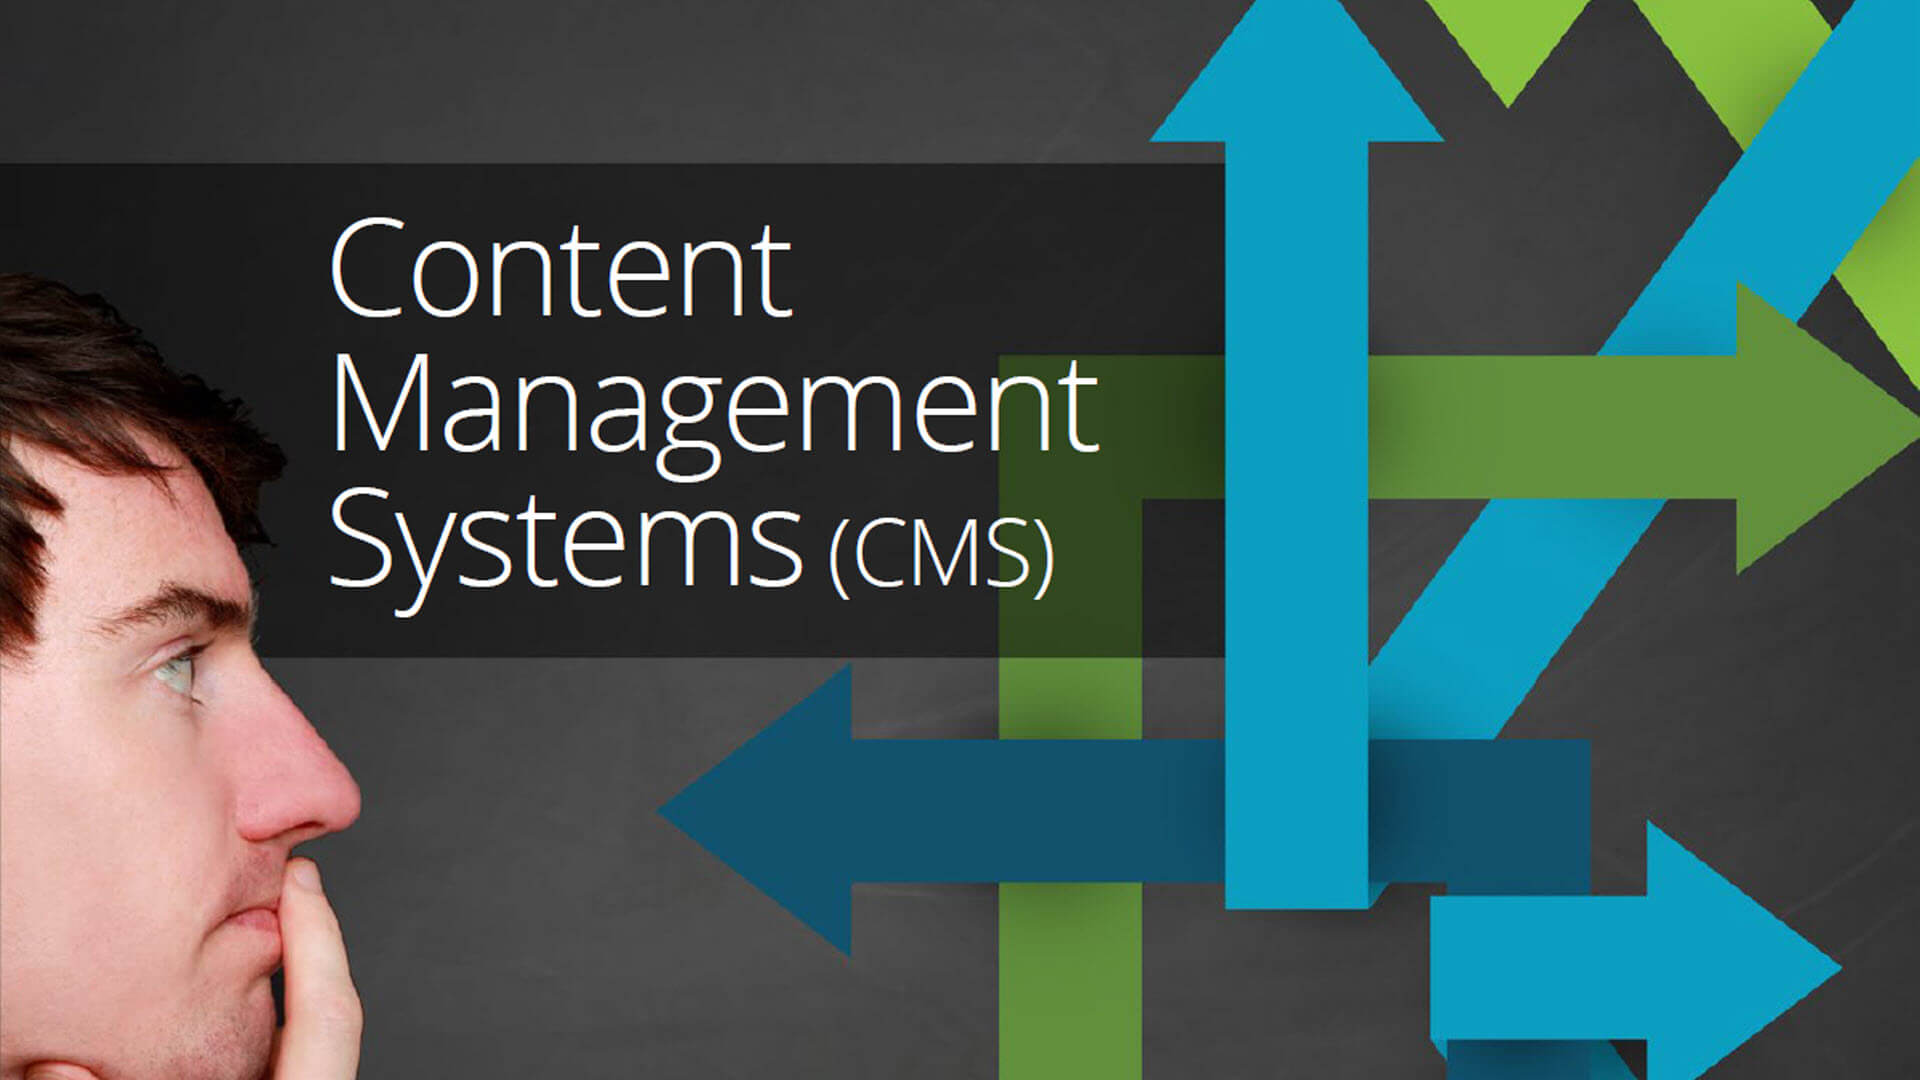 Why Do You Invest in A Content Management Solution?